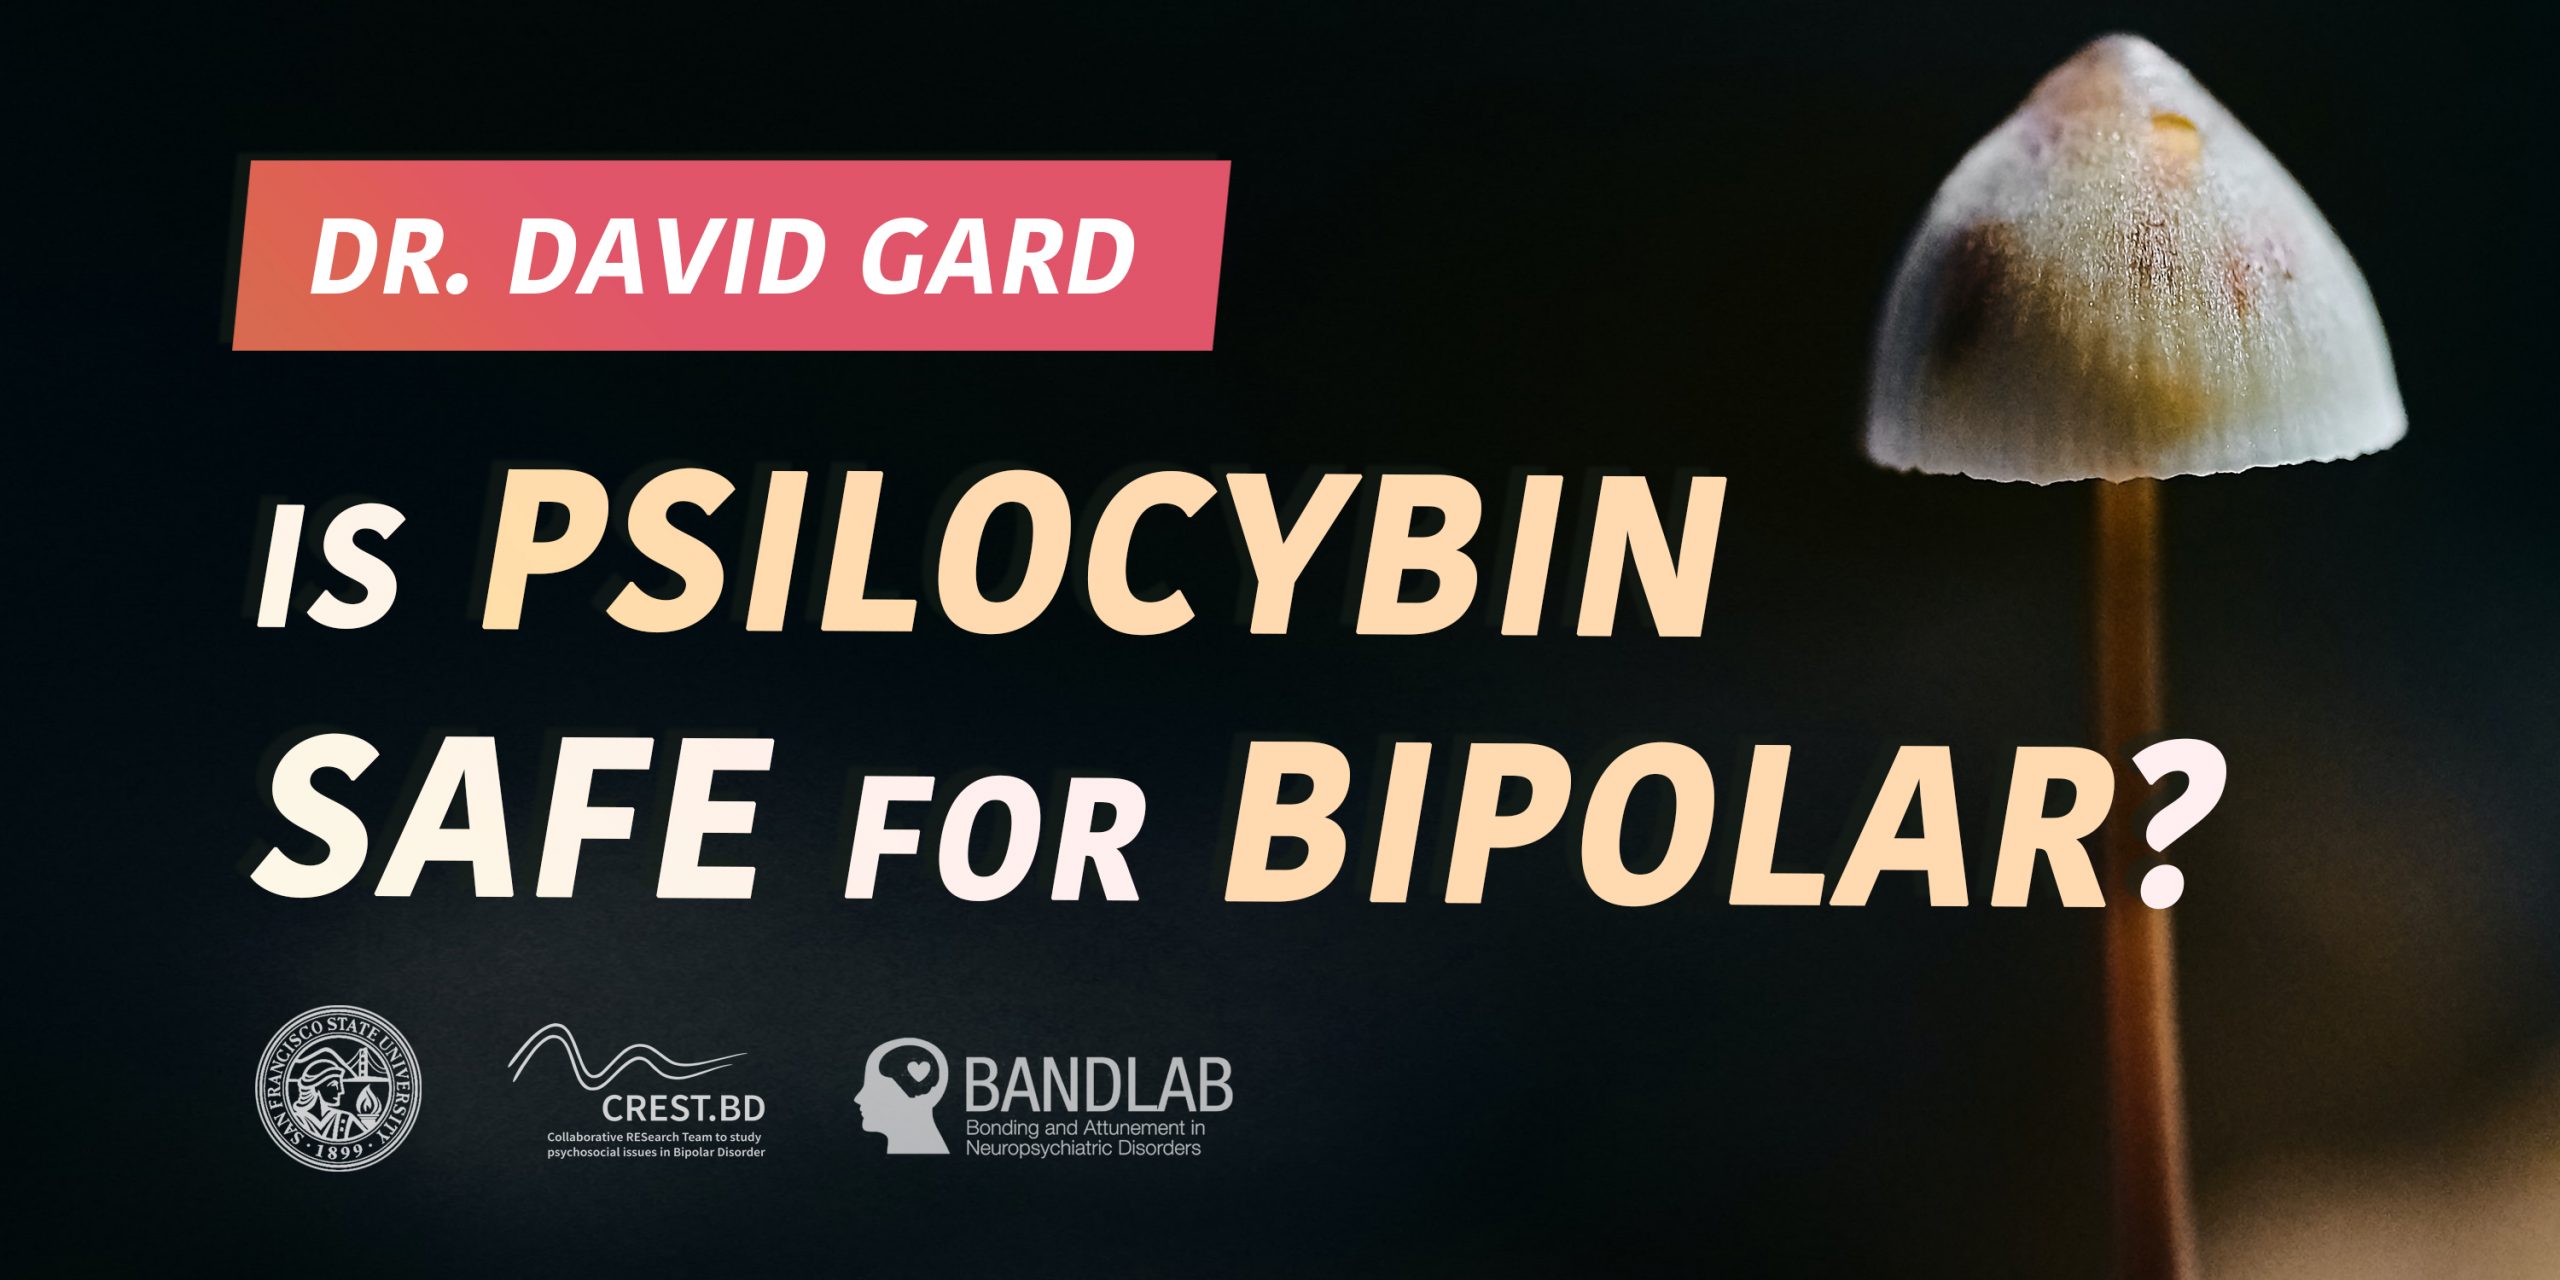 Could Psilocybin Be Helpful In Bipolar Depression? Is it Safe?